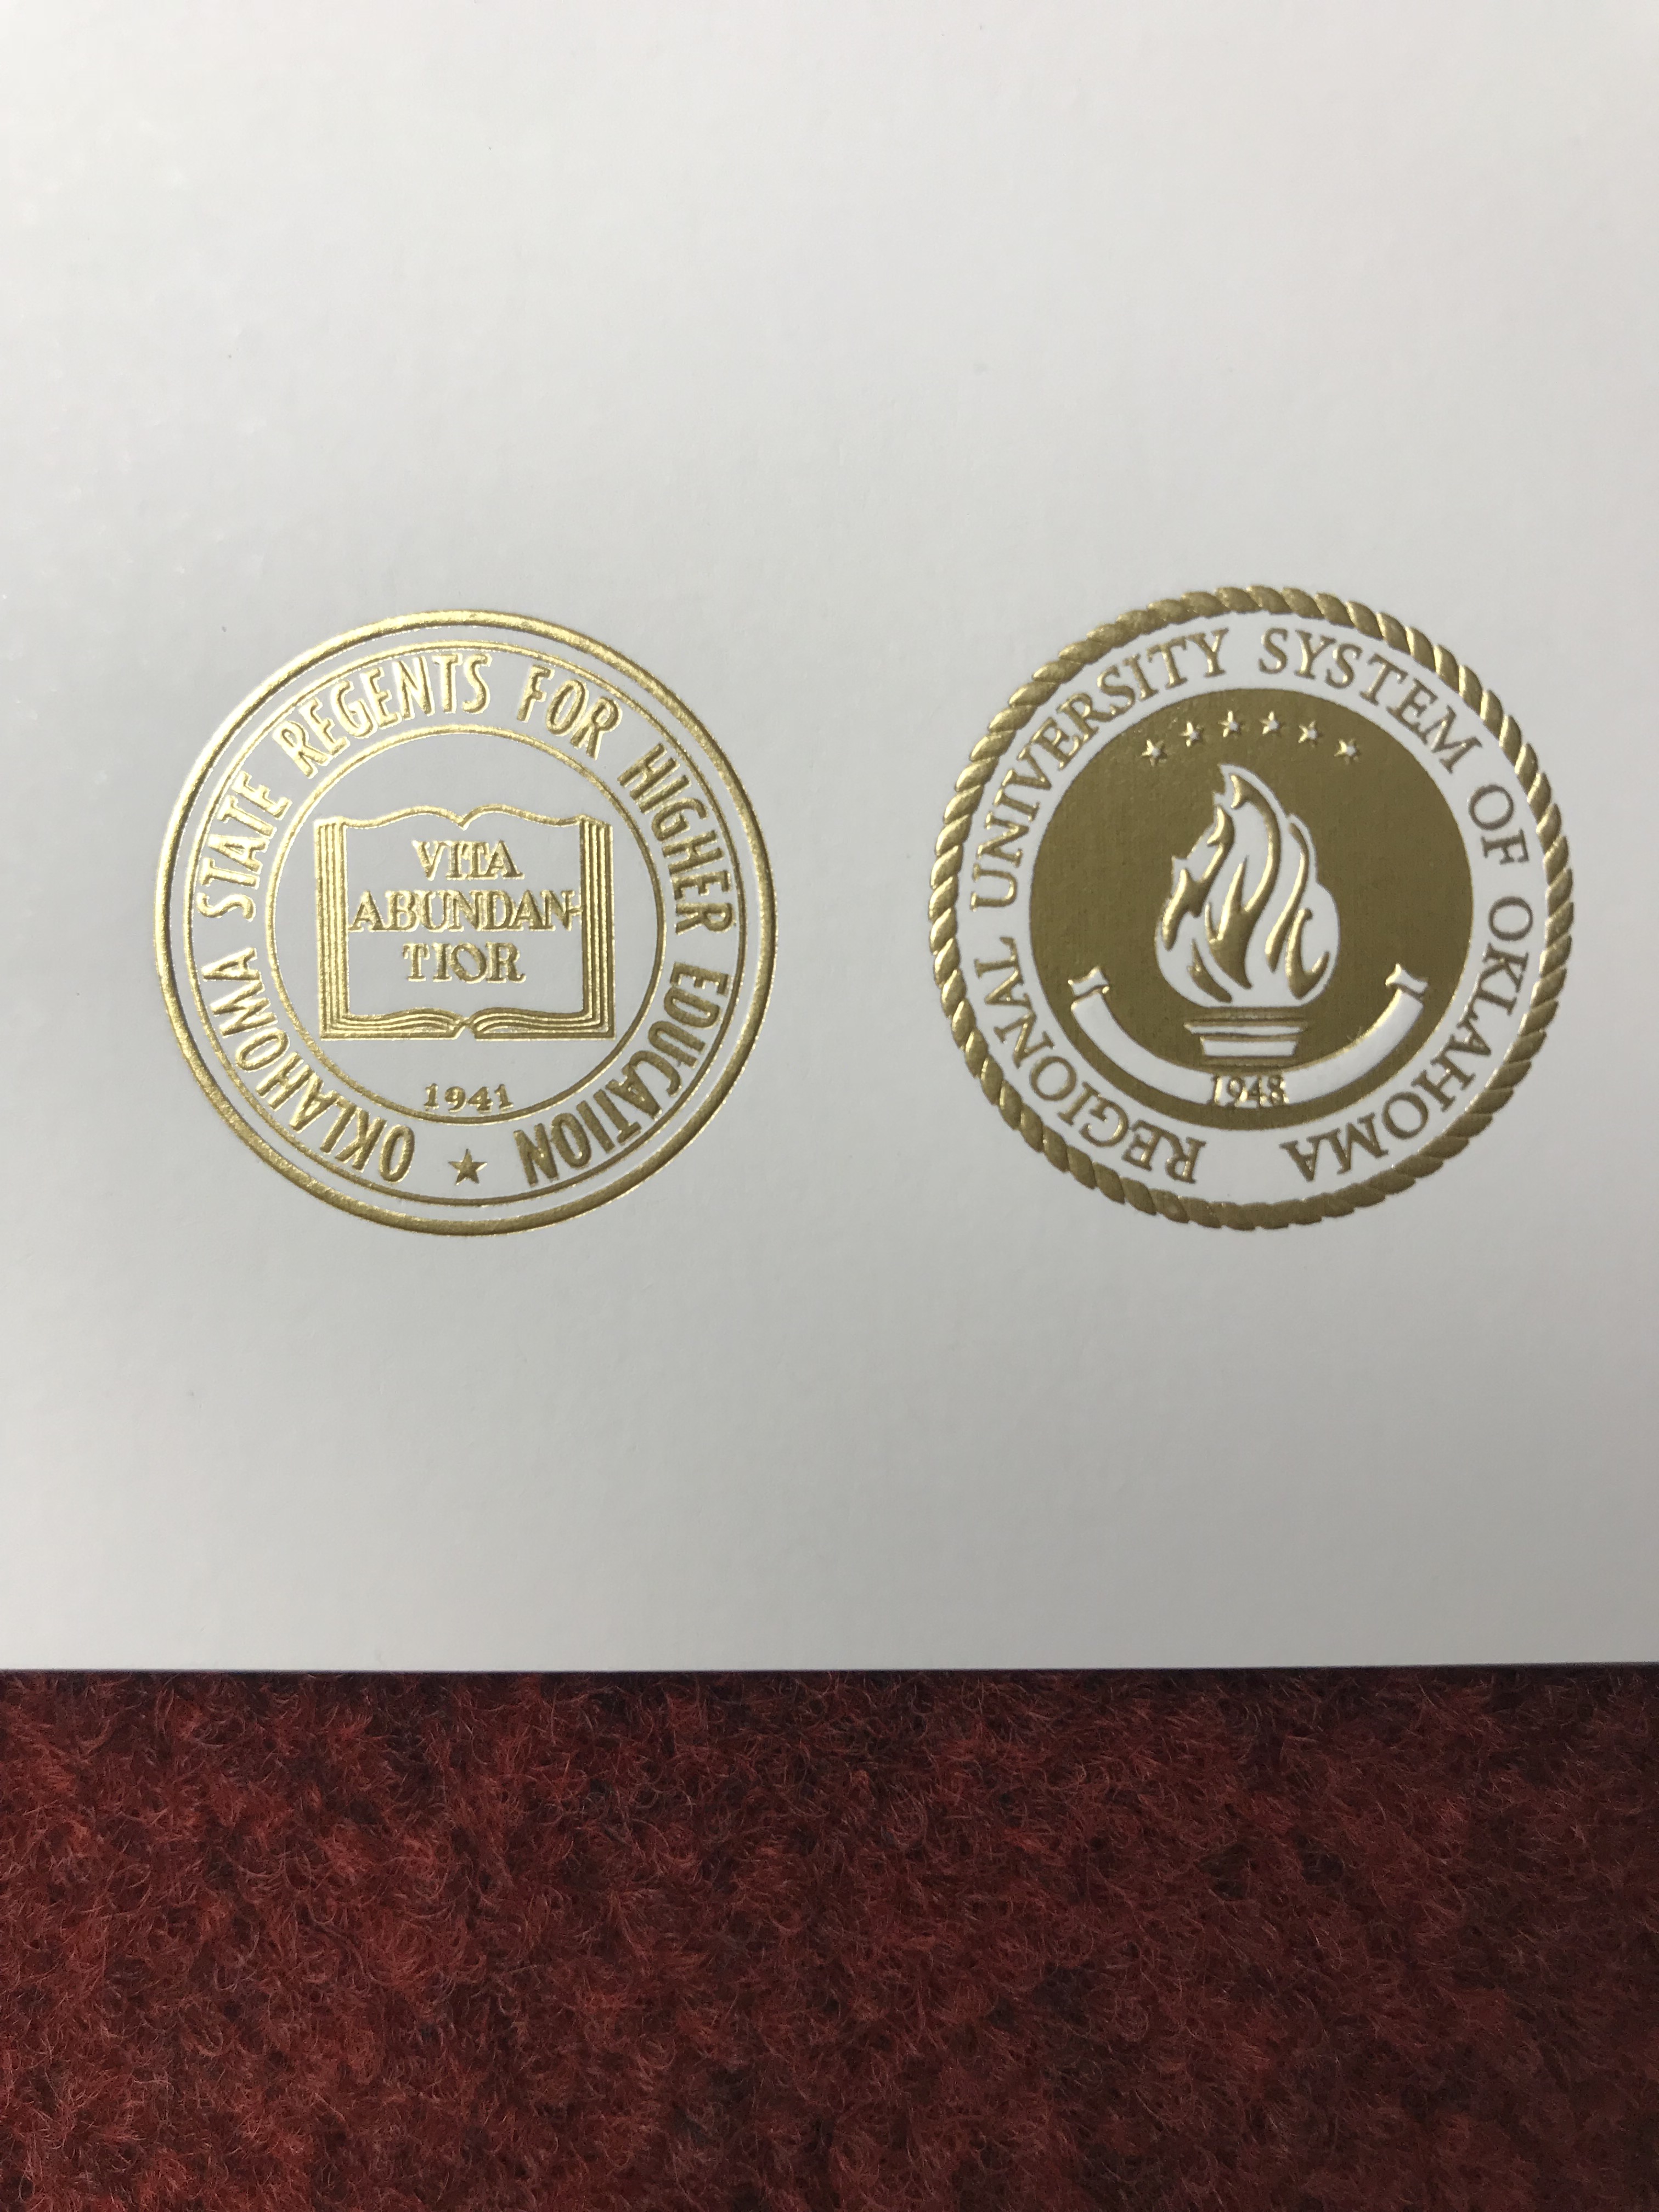 How does a real golden seal of University of Oklaho